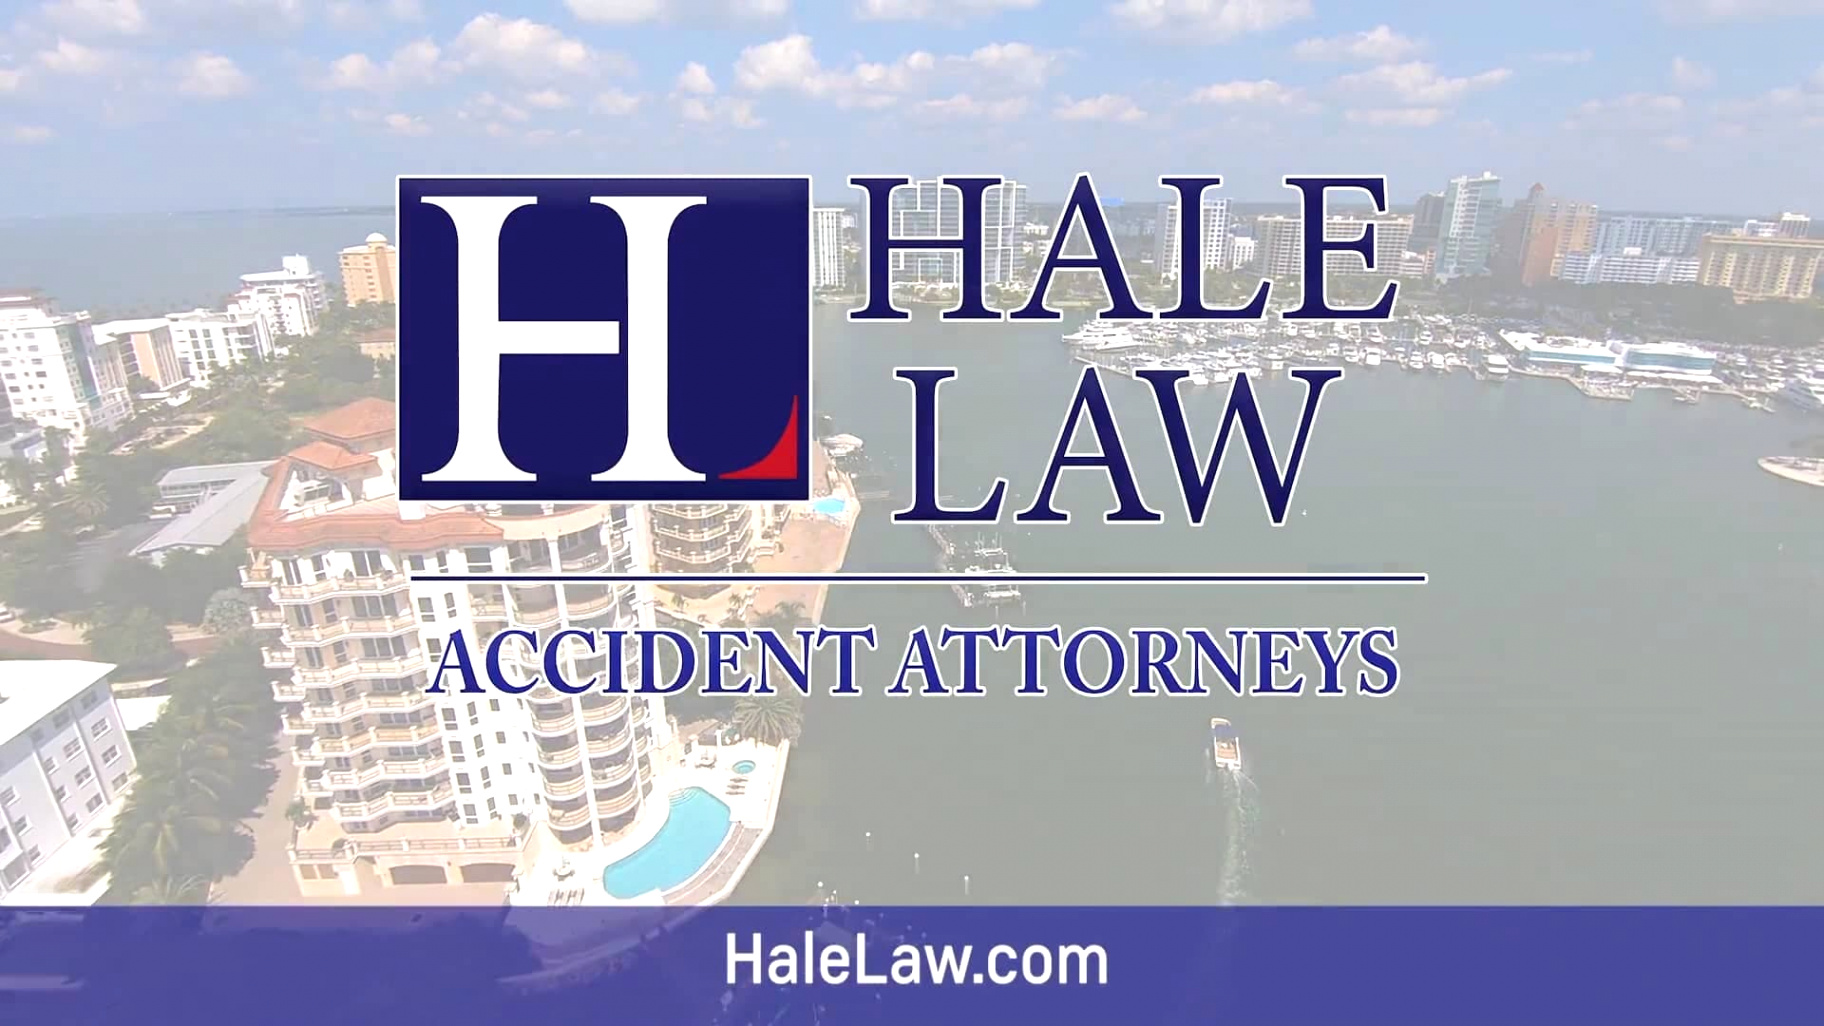 Personil Injury Lawyer In Seminole Fl Dans Hale Law Provides Personal Injury Lawyer Services Across Sarasota ...